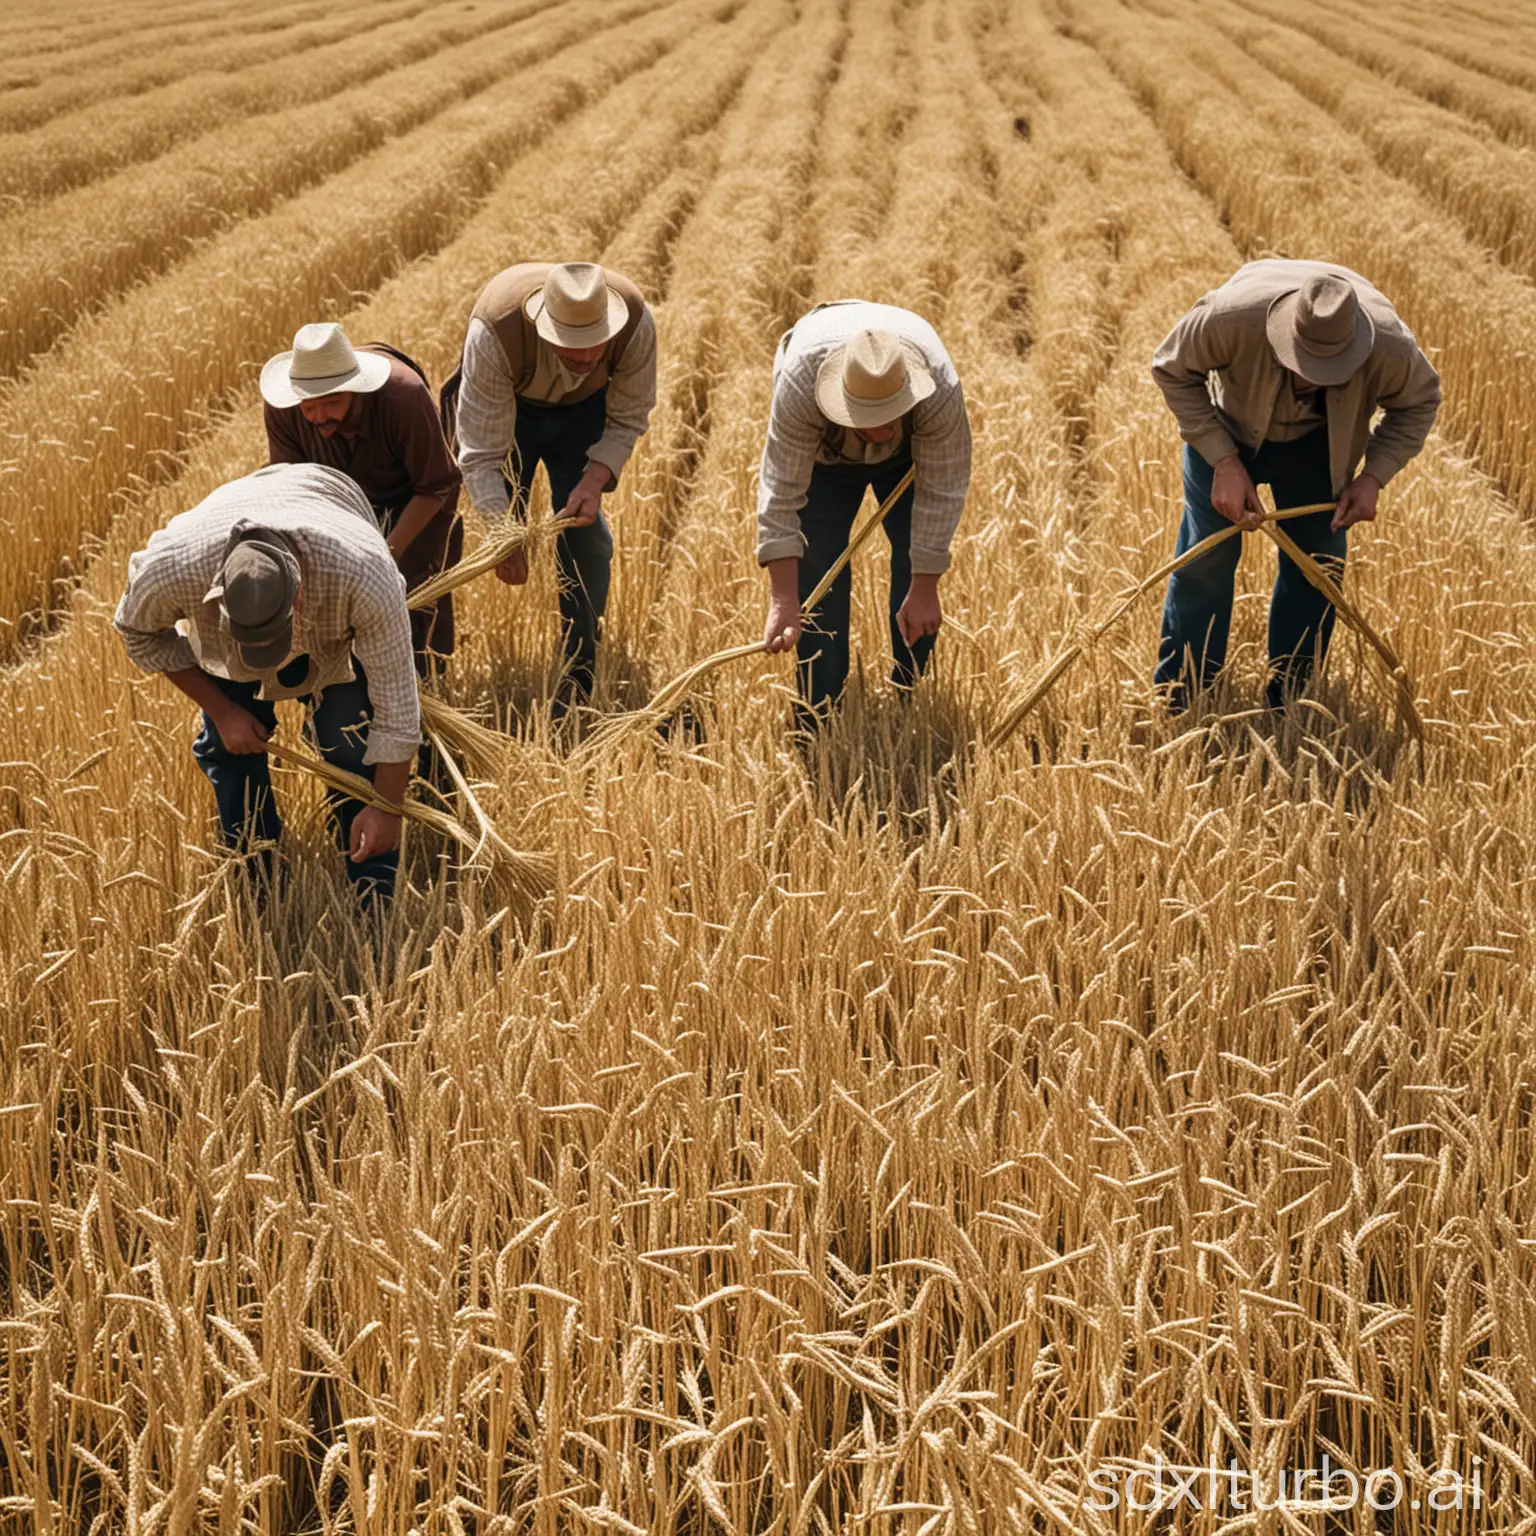 A group of farmers in the wheat field, using sickles, completely bend over to harvest the wheat,